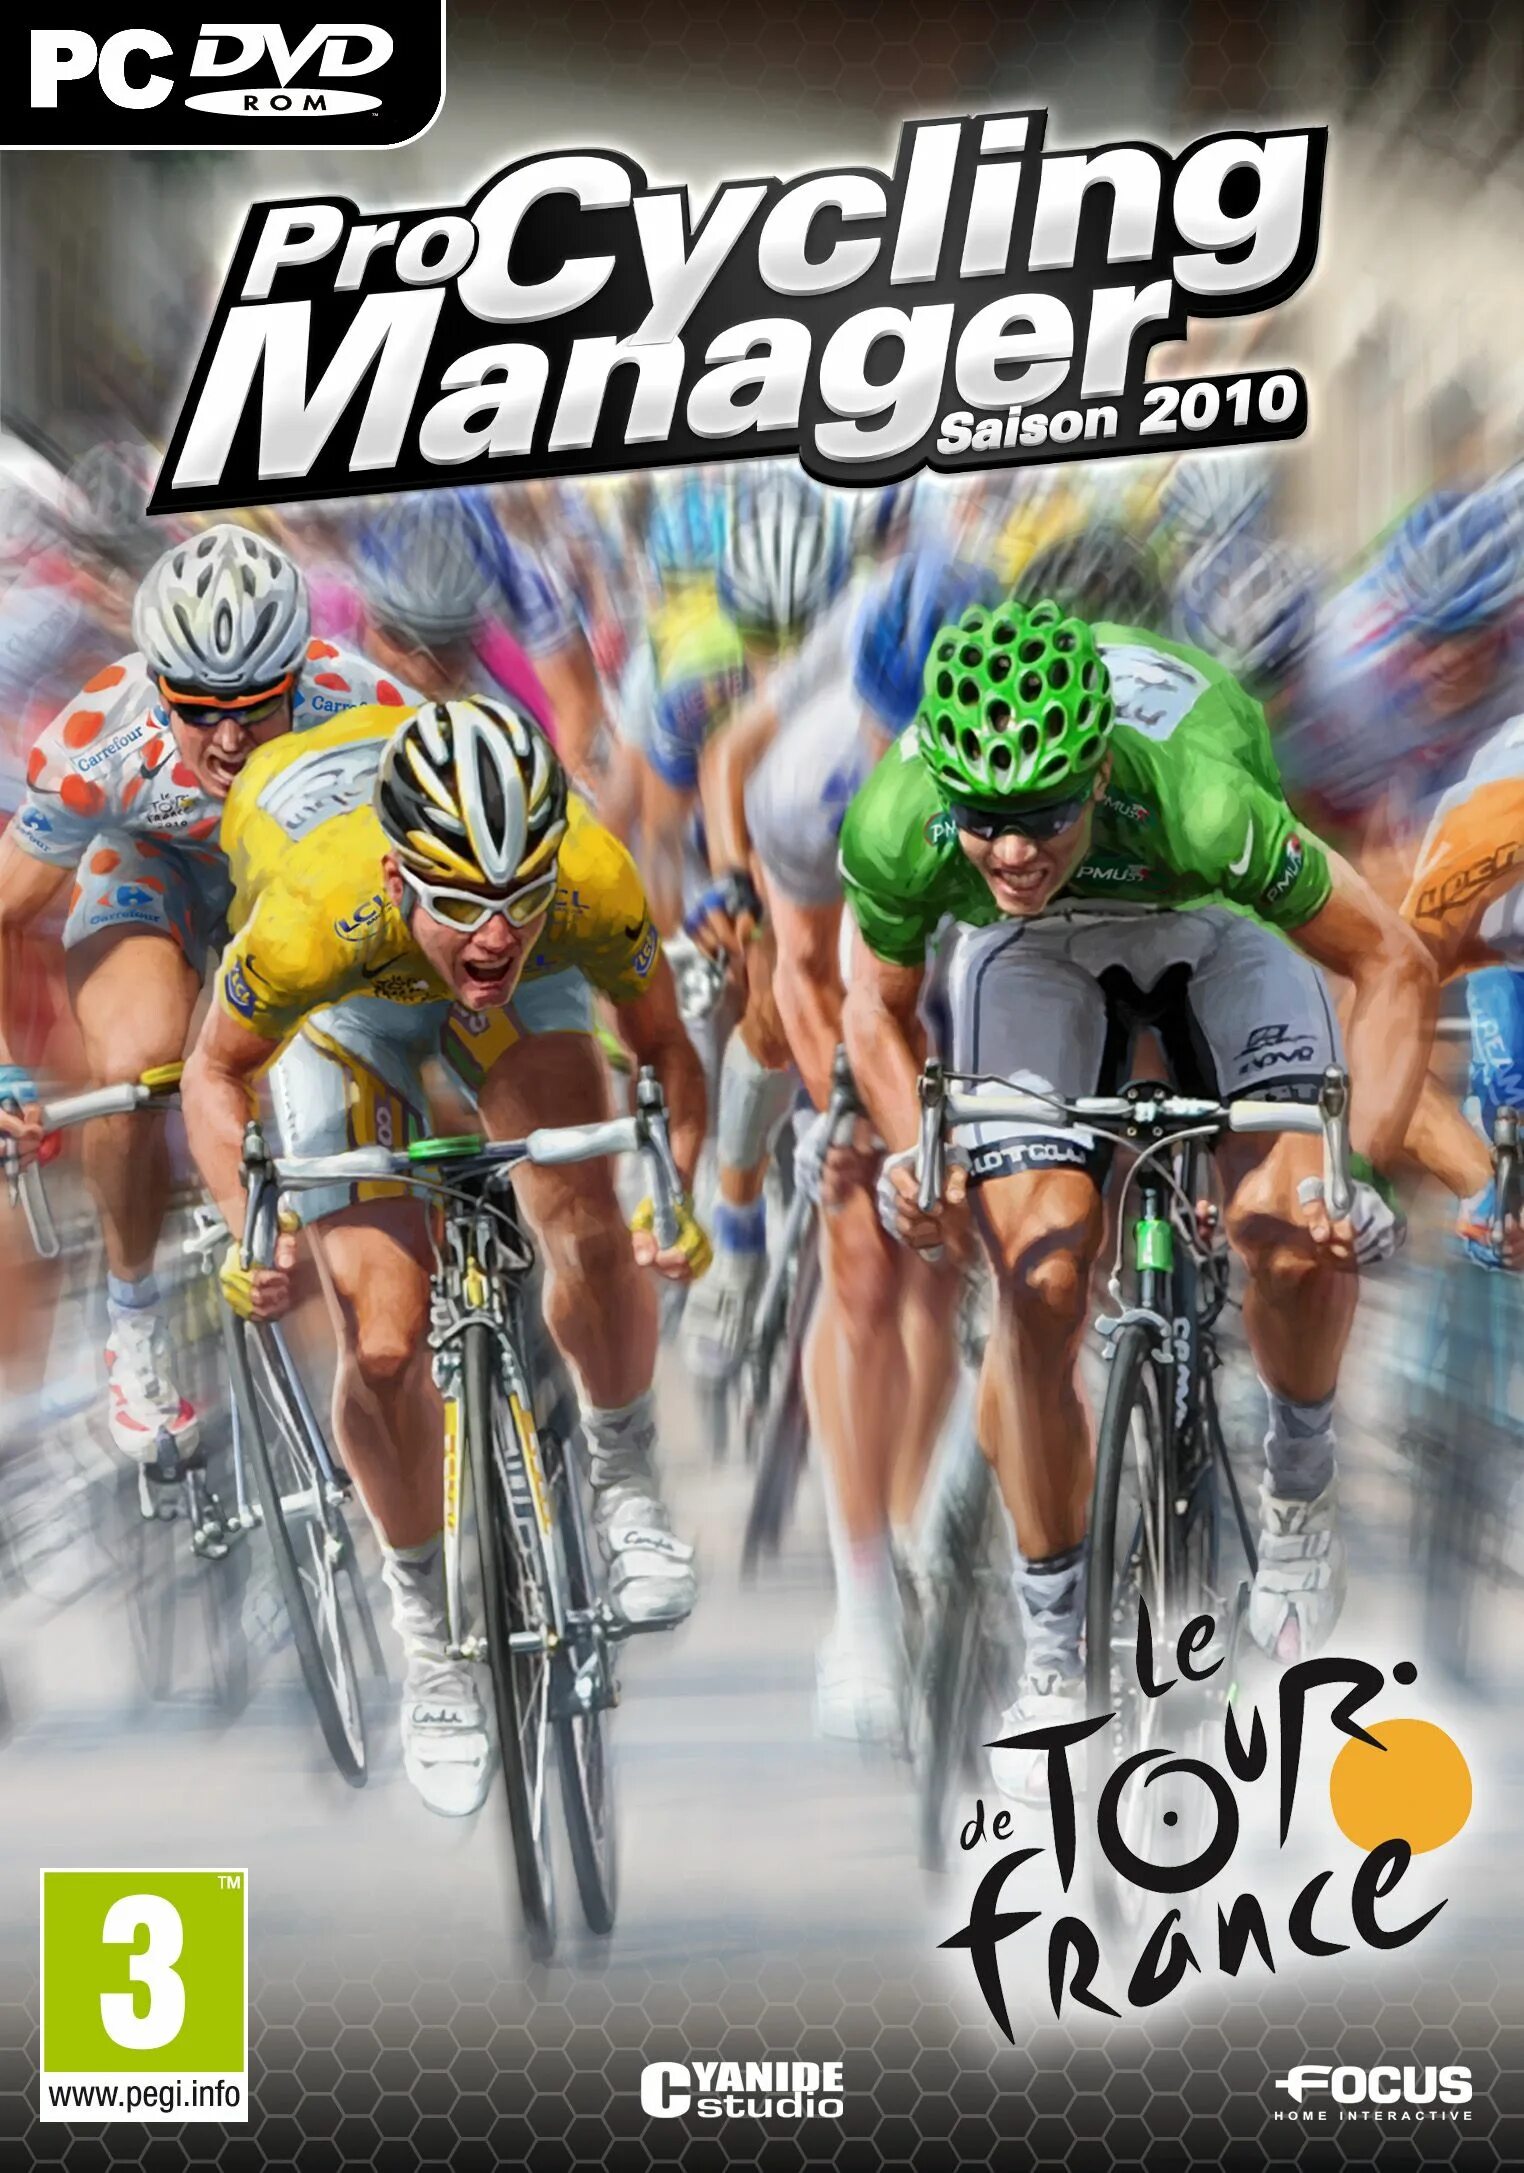 Cycling Manager игра. Pro Cycling Manager 2013. Популярные игры 2010 года. Pro cycling